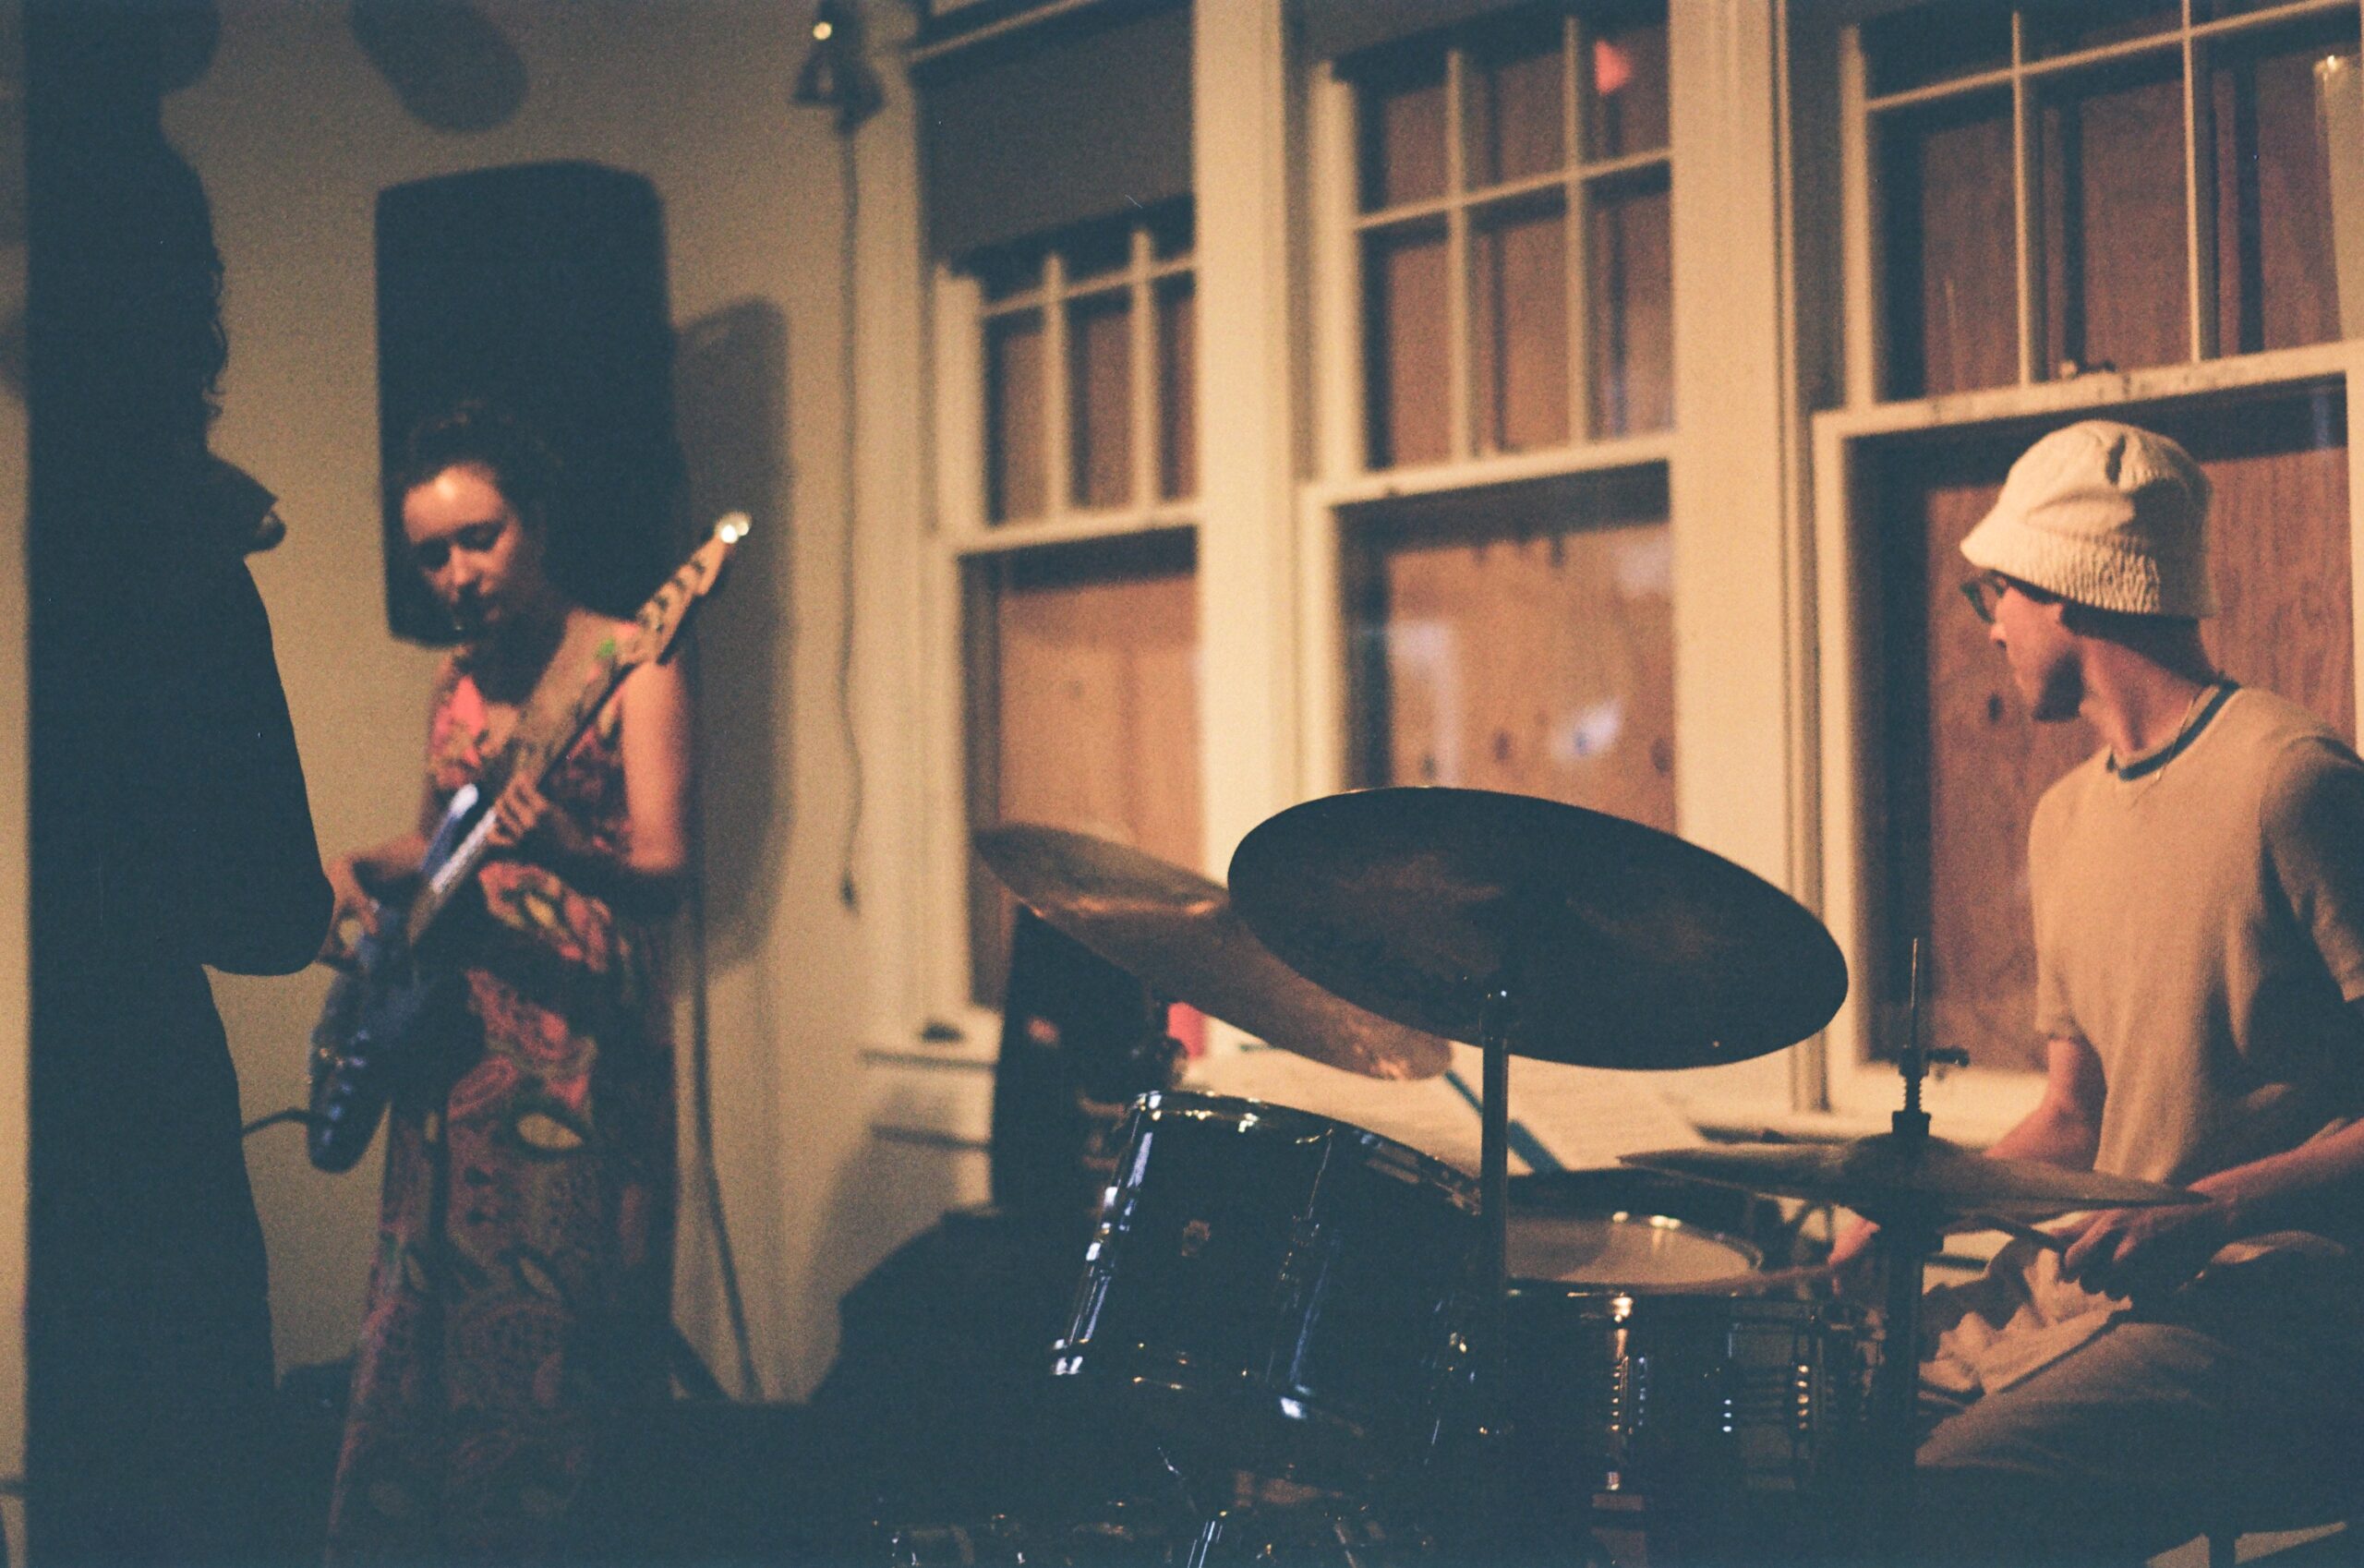 A drummer and guitarist play in front of three boarded up windows